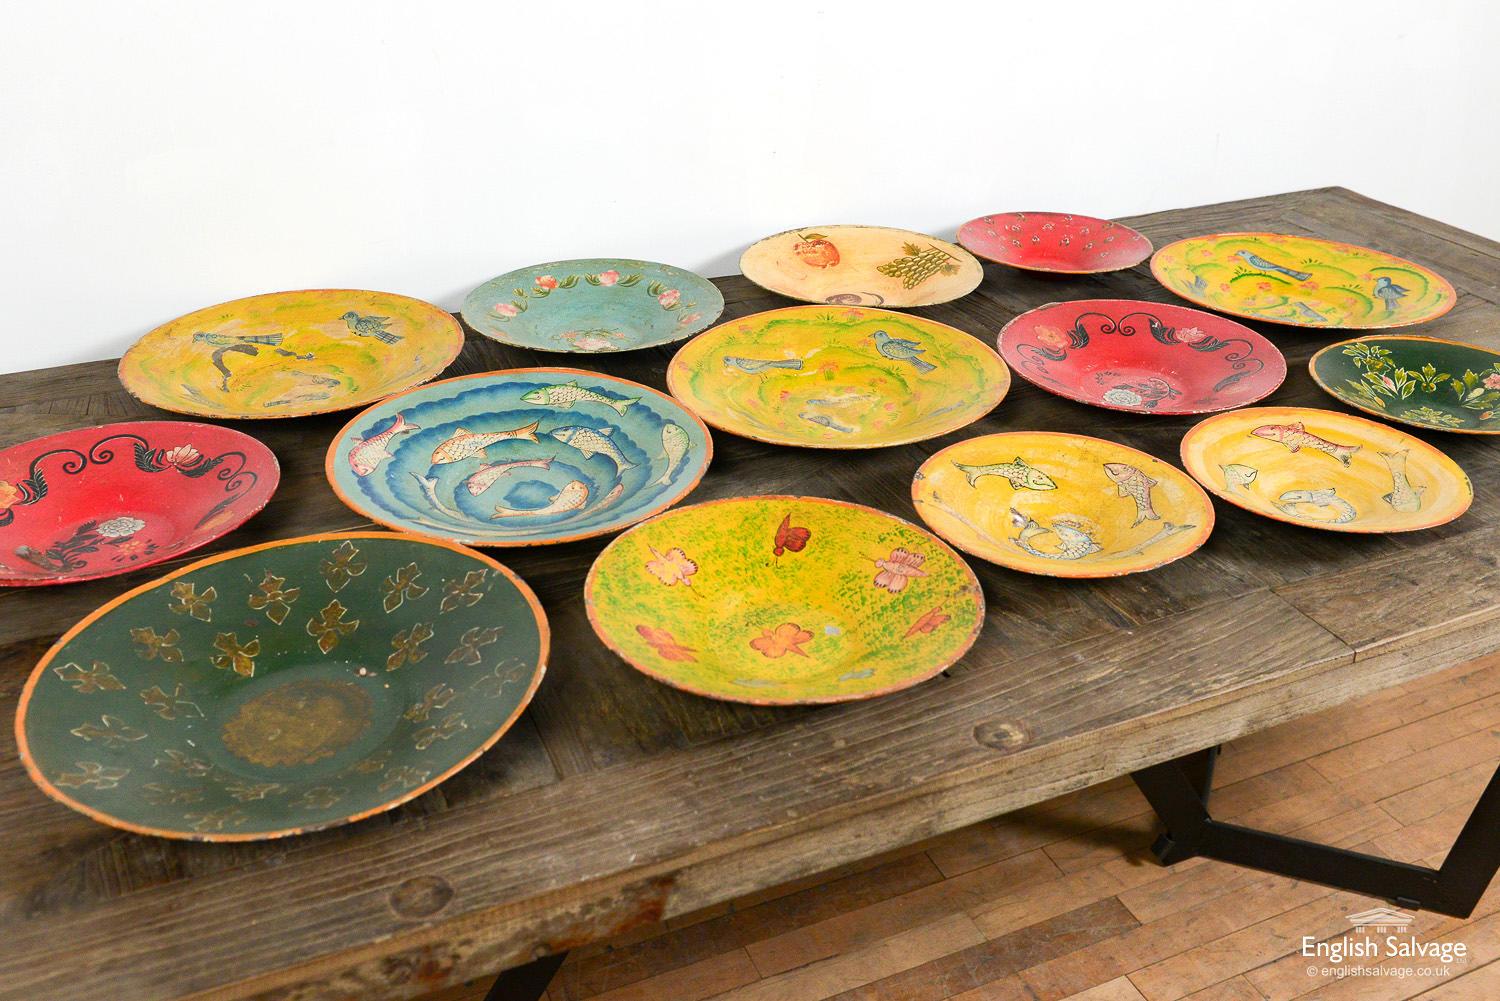 Delightful vintage hand painted metal plates / platters / bowls / dishes in three different sizes. There are different hand painted floral, fish, bird and fruit designs. Each is unique and has weathered differently with chips and scratches forming a